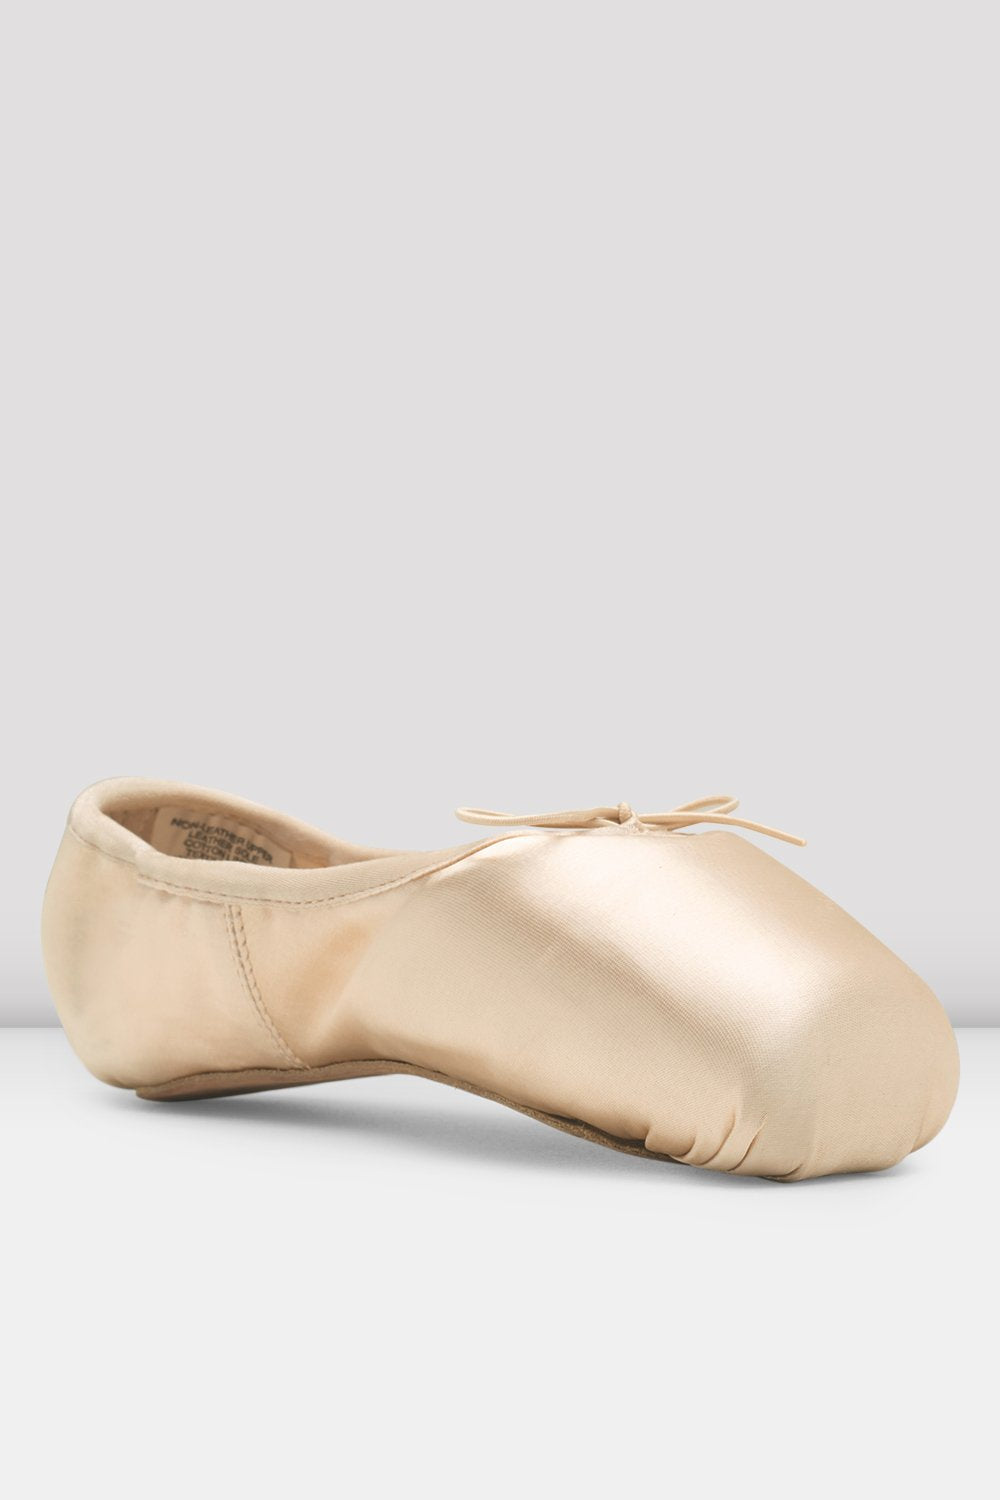 bloch synthesis pointe shoes